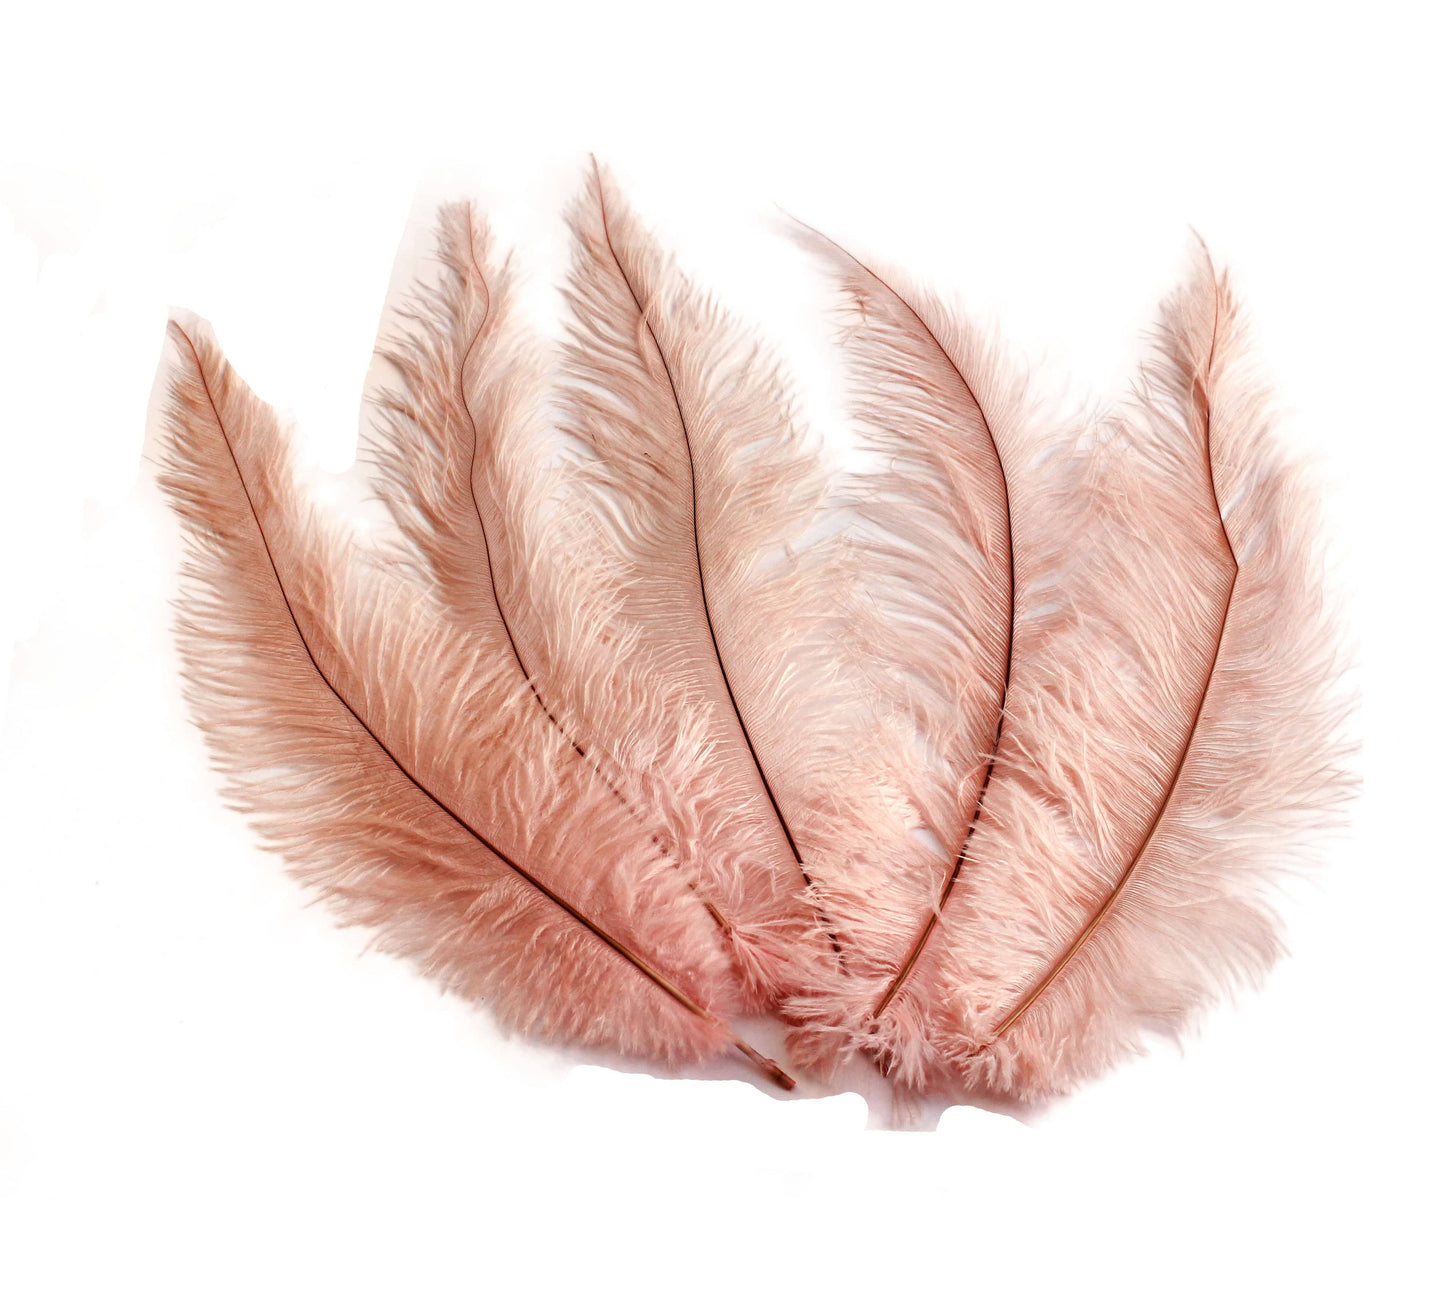 Ostrich Feather Spad Plumes 13-16" (Baby Pink) - Buy Ostrich Feathers